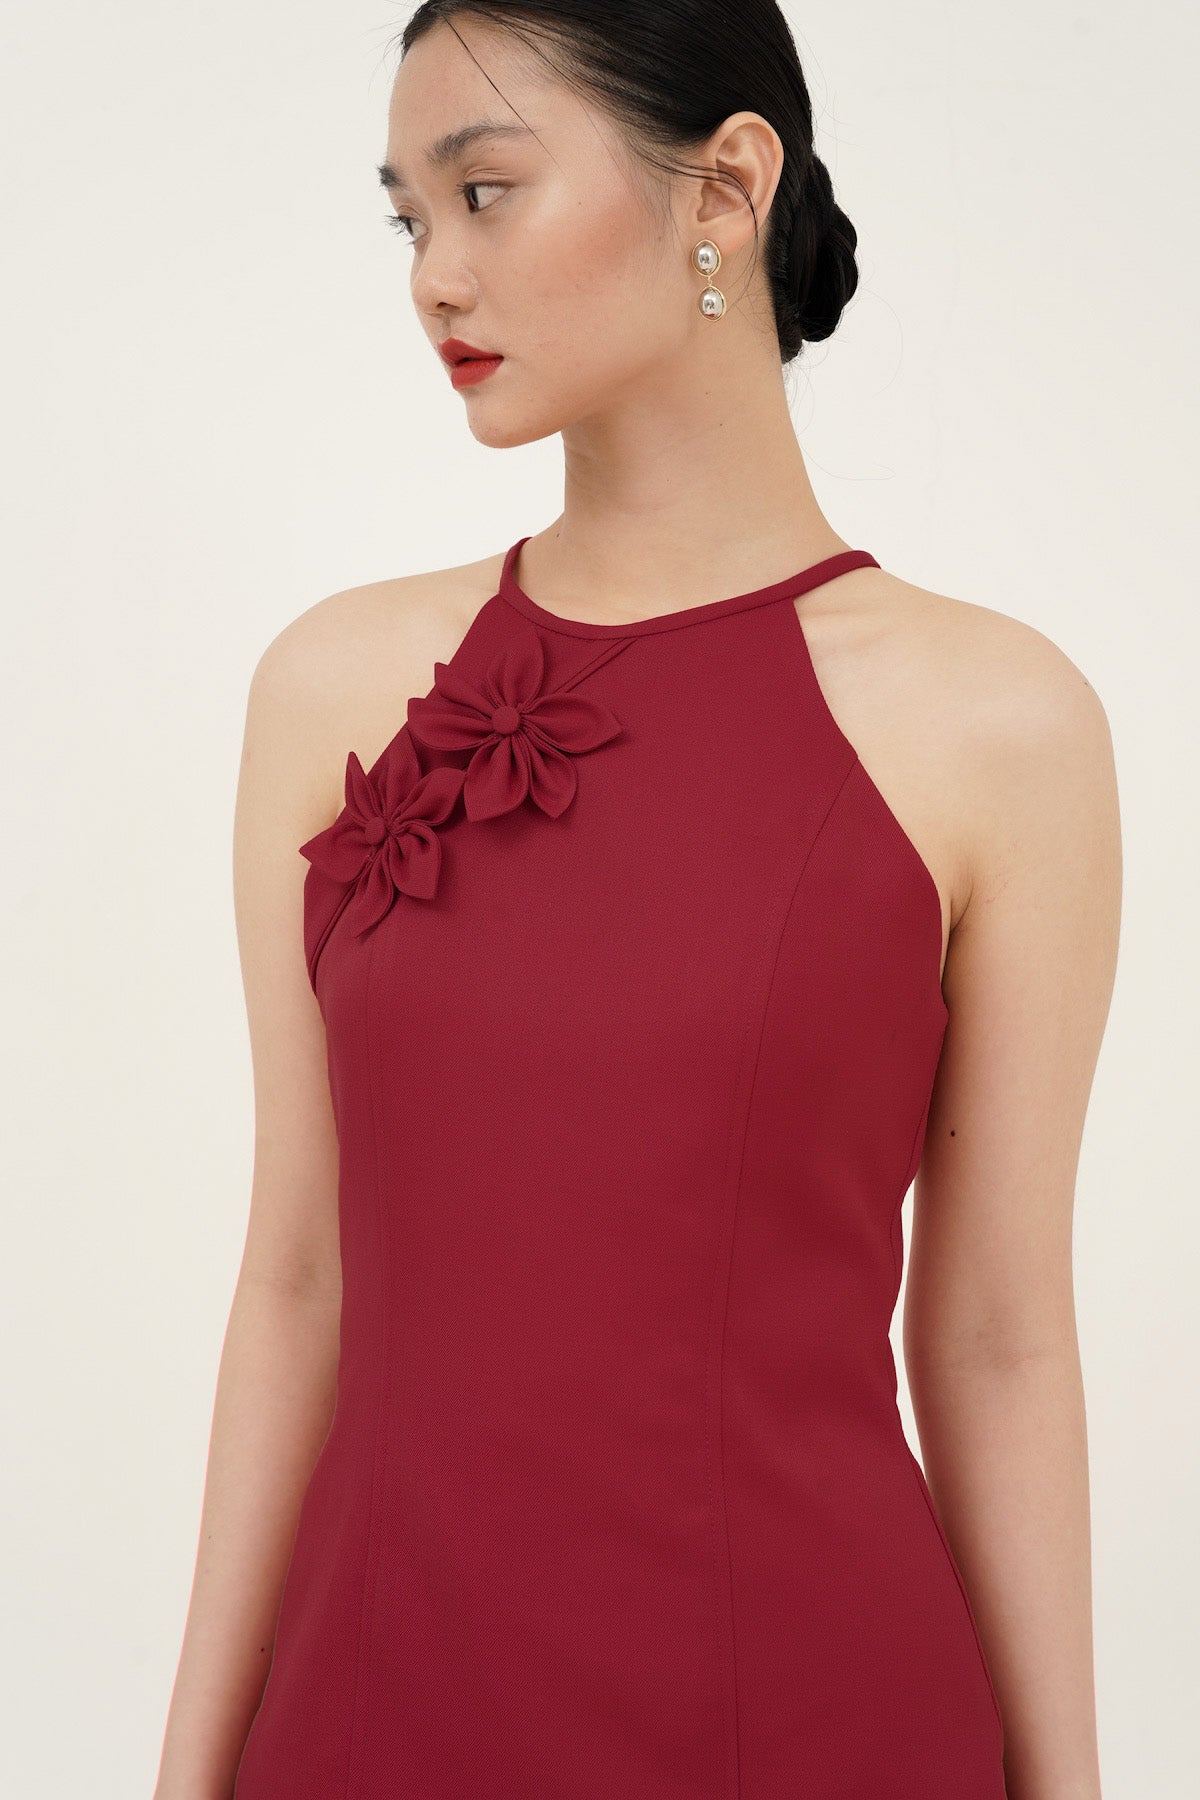 Chao Top In Red (LAST PIECE)